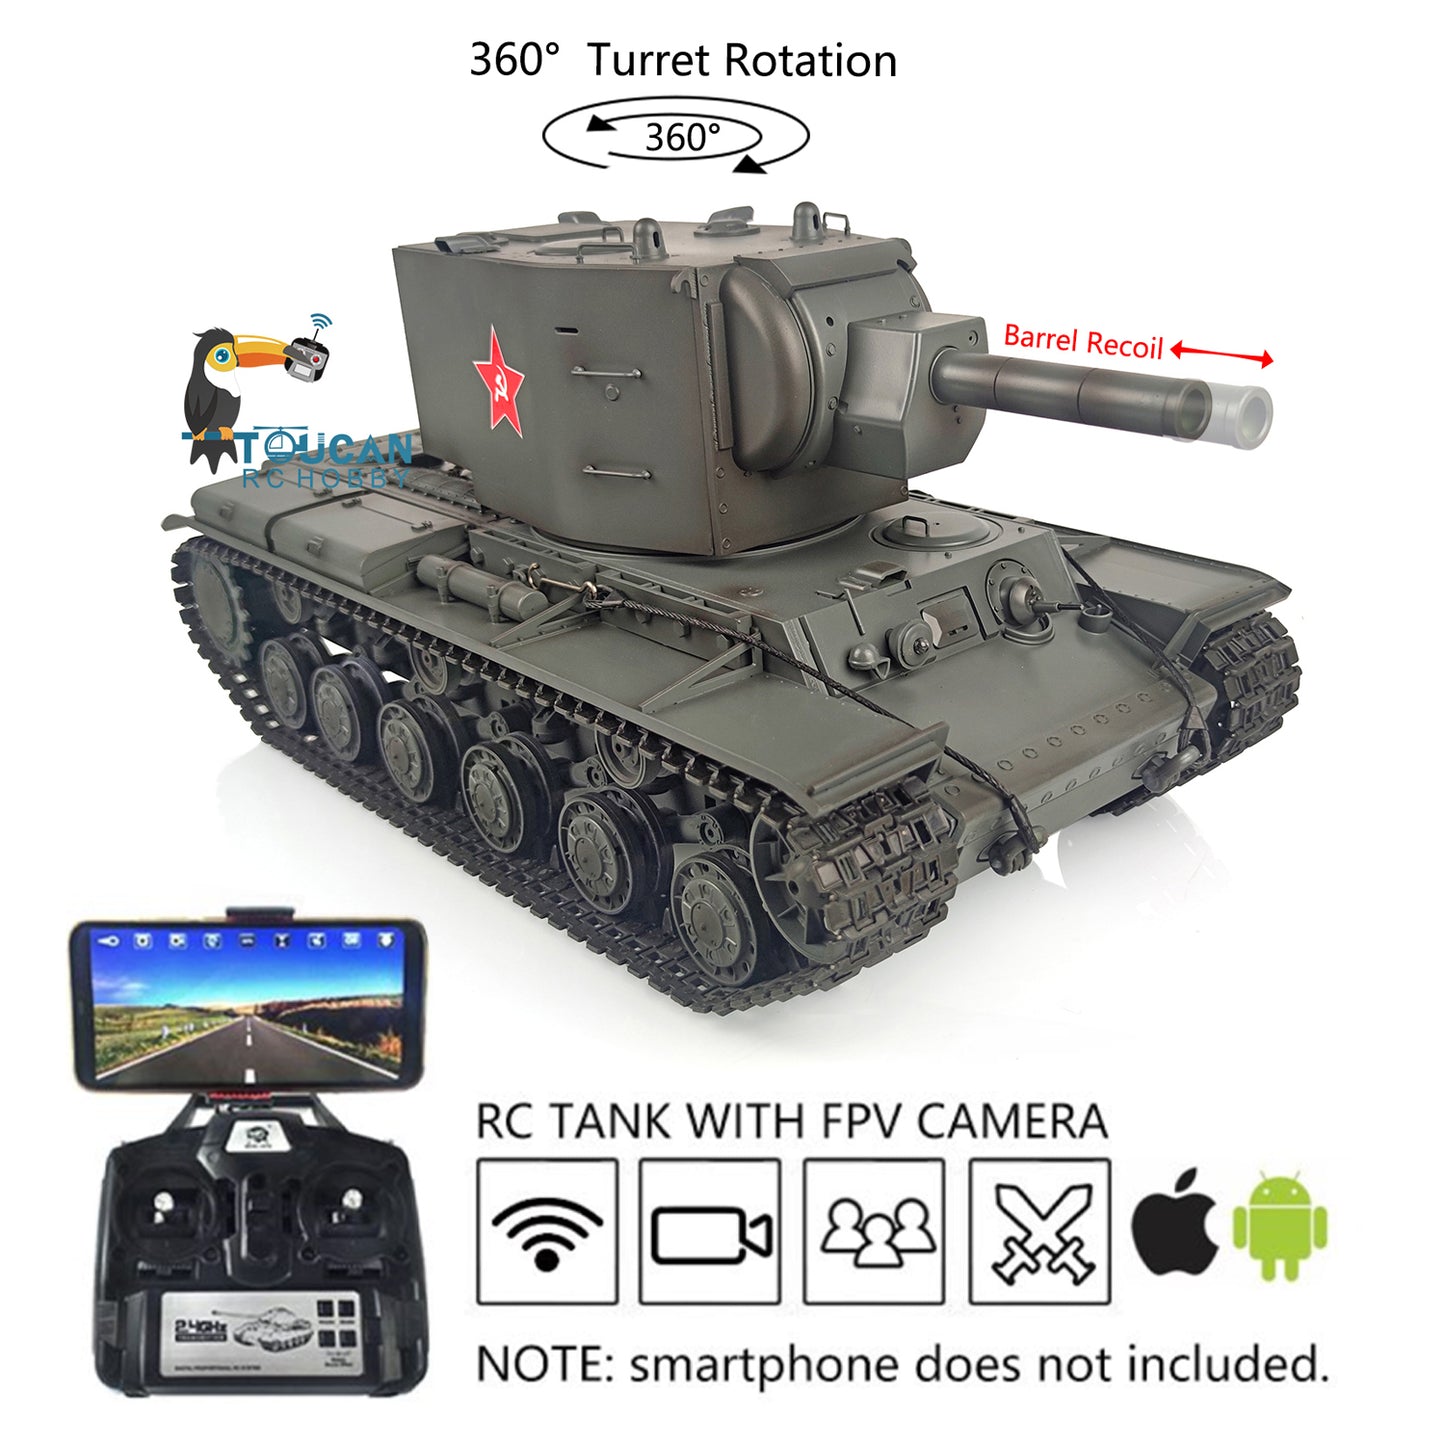 Henglong 1/16 7.0 RC Tank Remote Controlled Military Truck 3949 Upgraded Painted FPV Soviet KV-2 Gigant RTR 360 Degree Turret